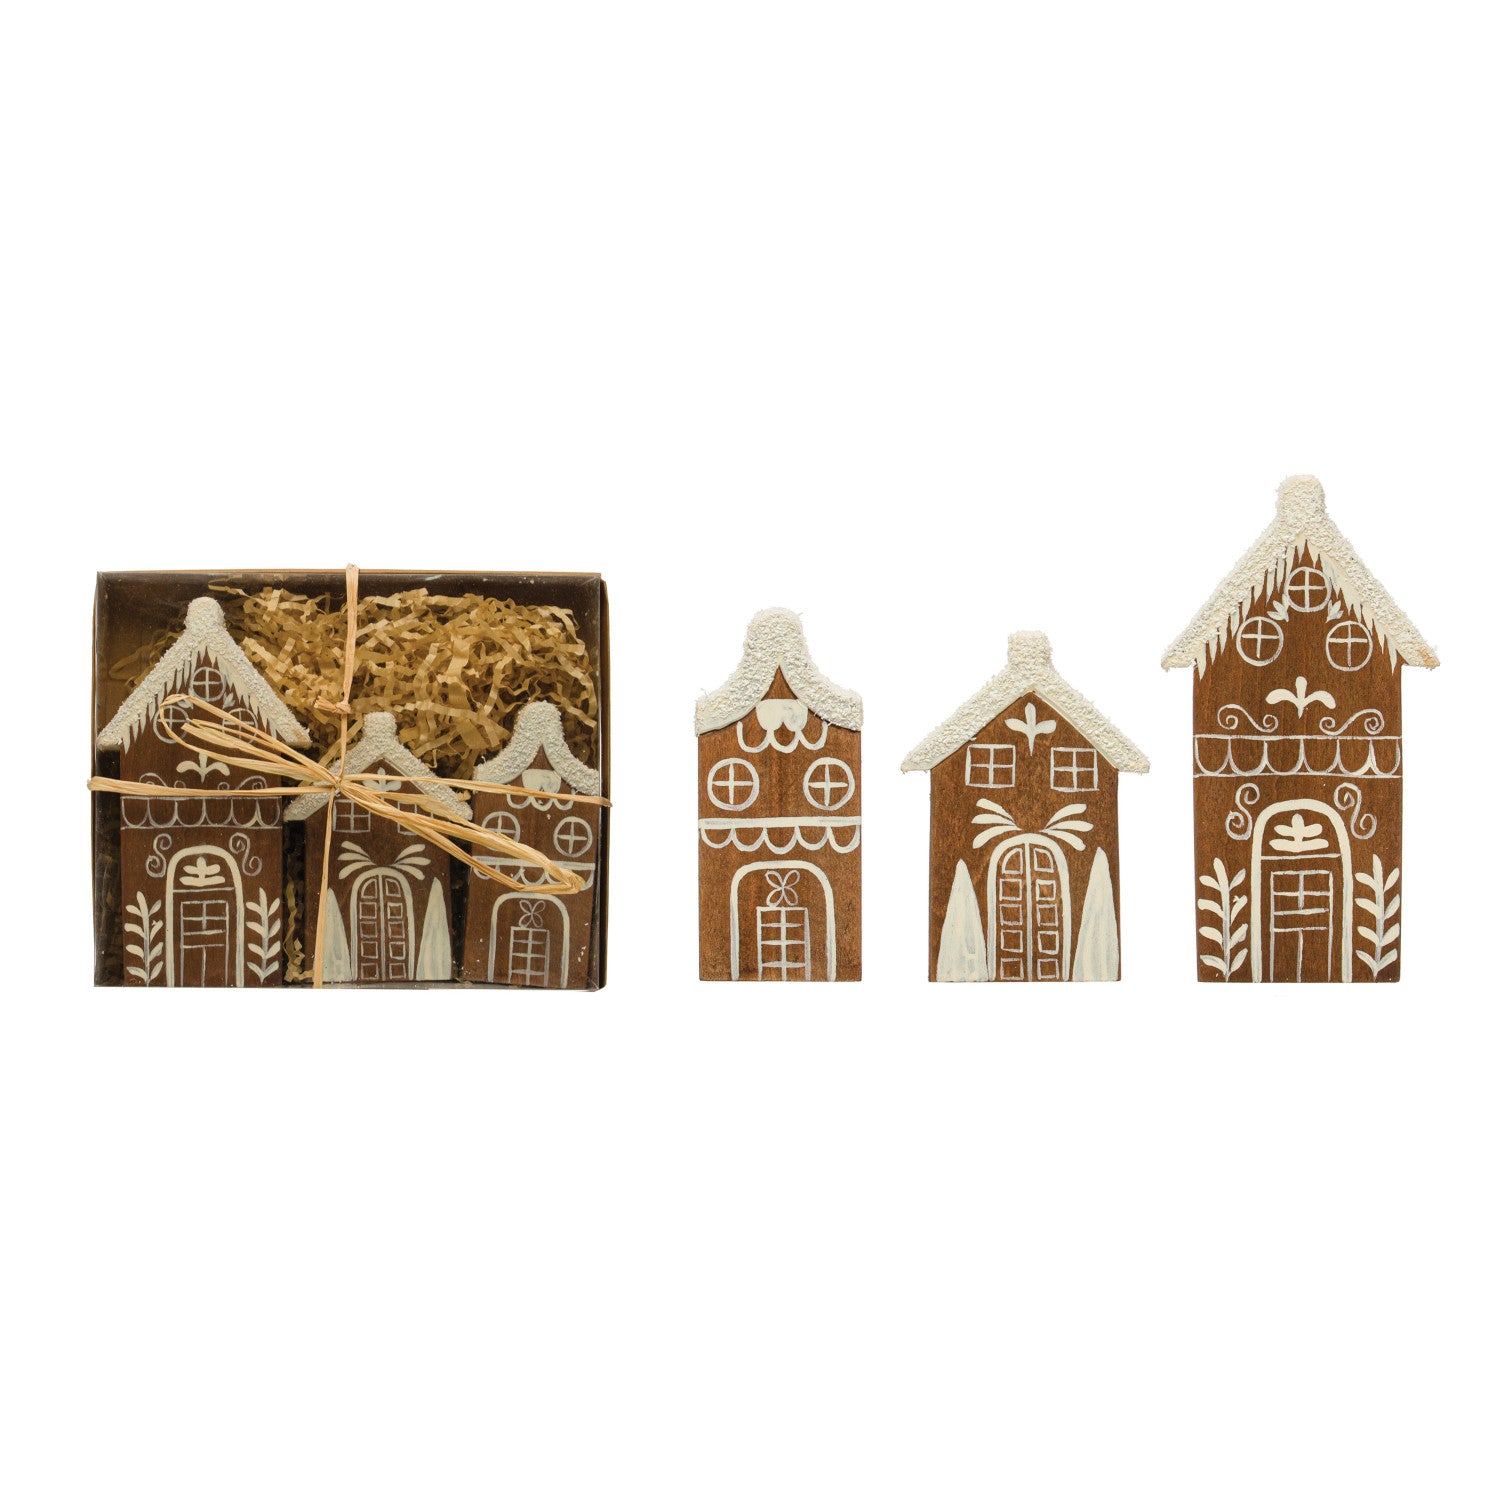 Gingerbread houses set of 3